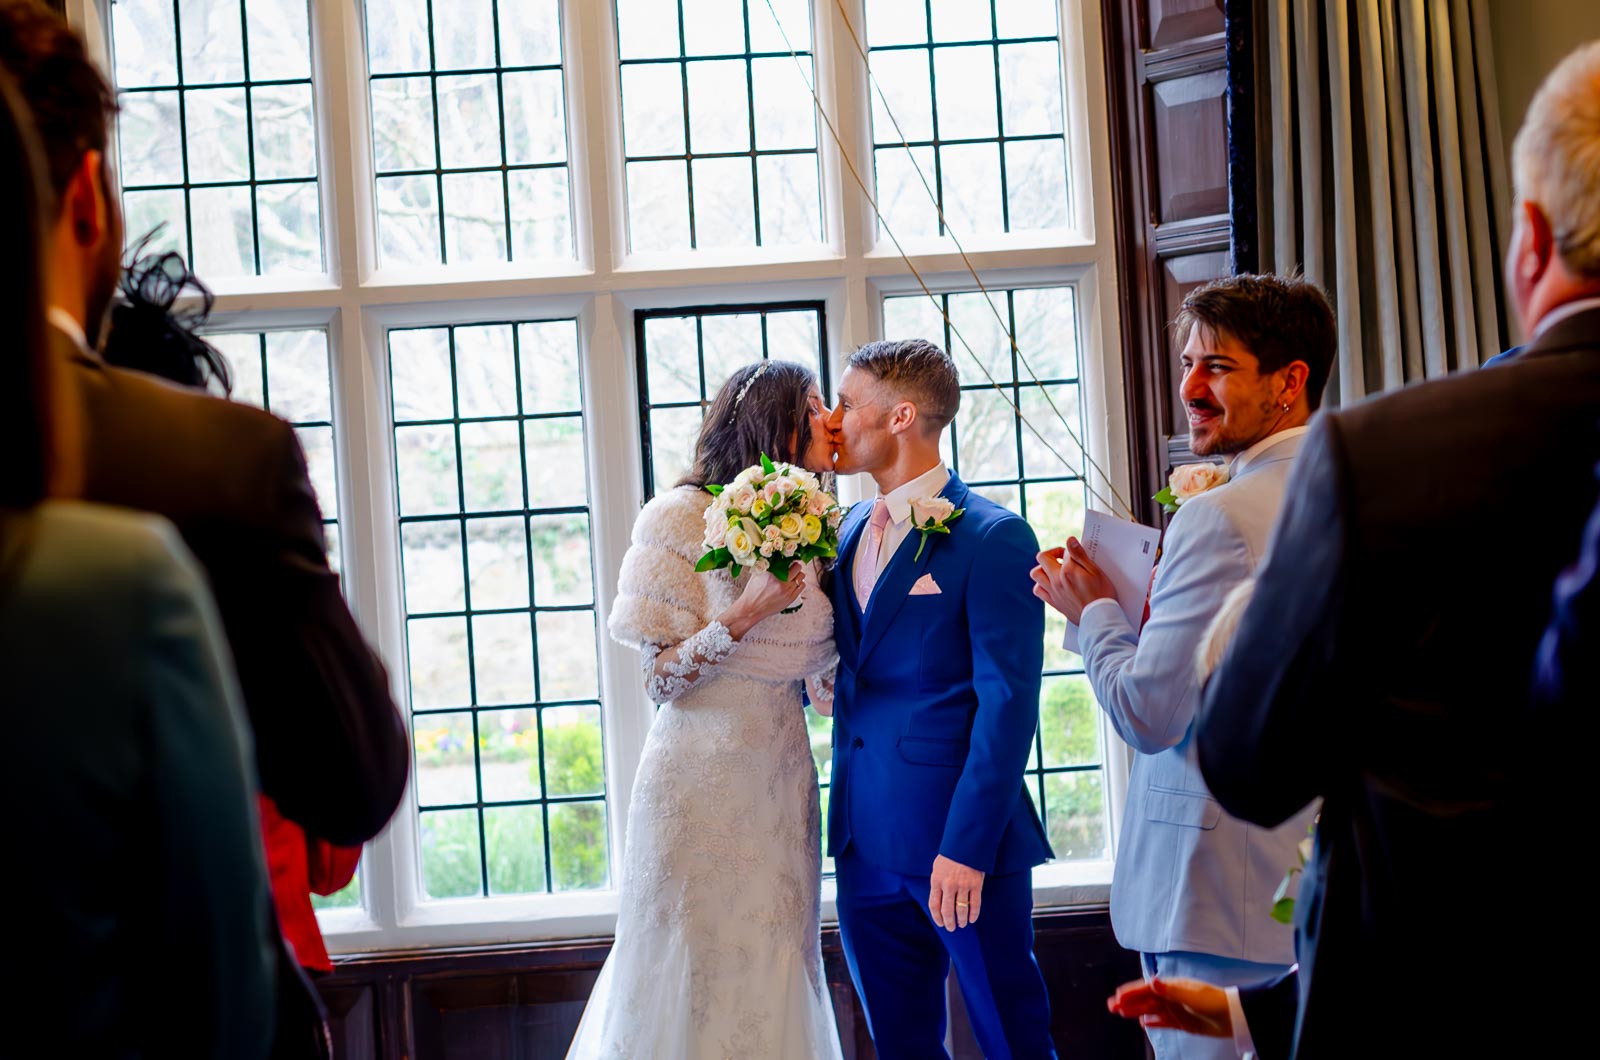 Virginia and Simon embrace after becoming husband and wife in the Ainsworth Room, Lewes Register Office.